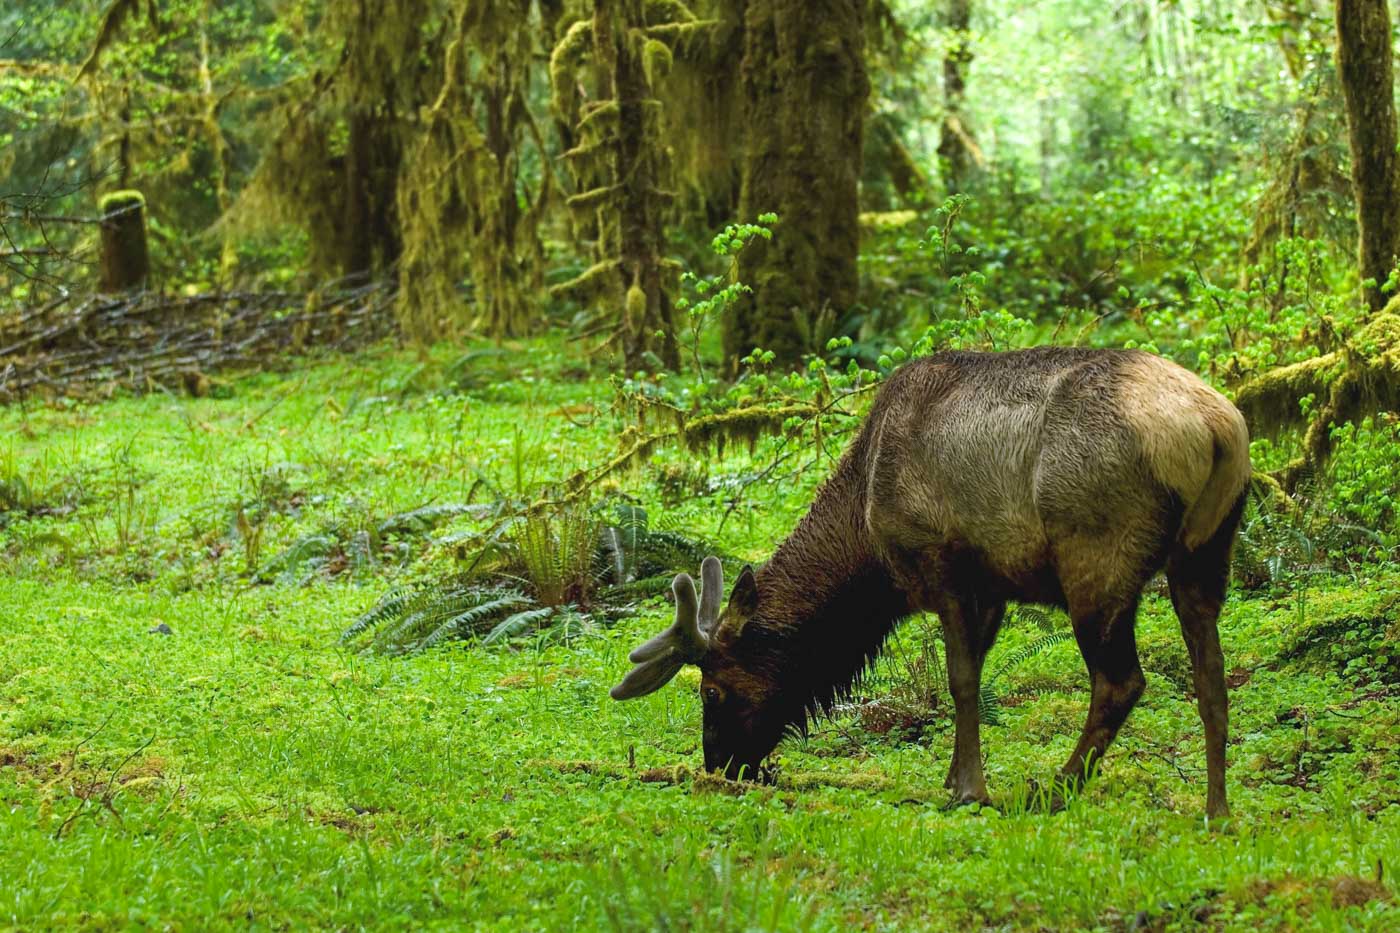 An elk grazing on grass in the middle of the forest.